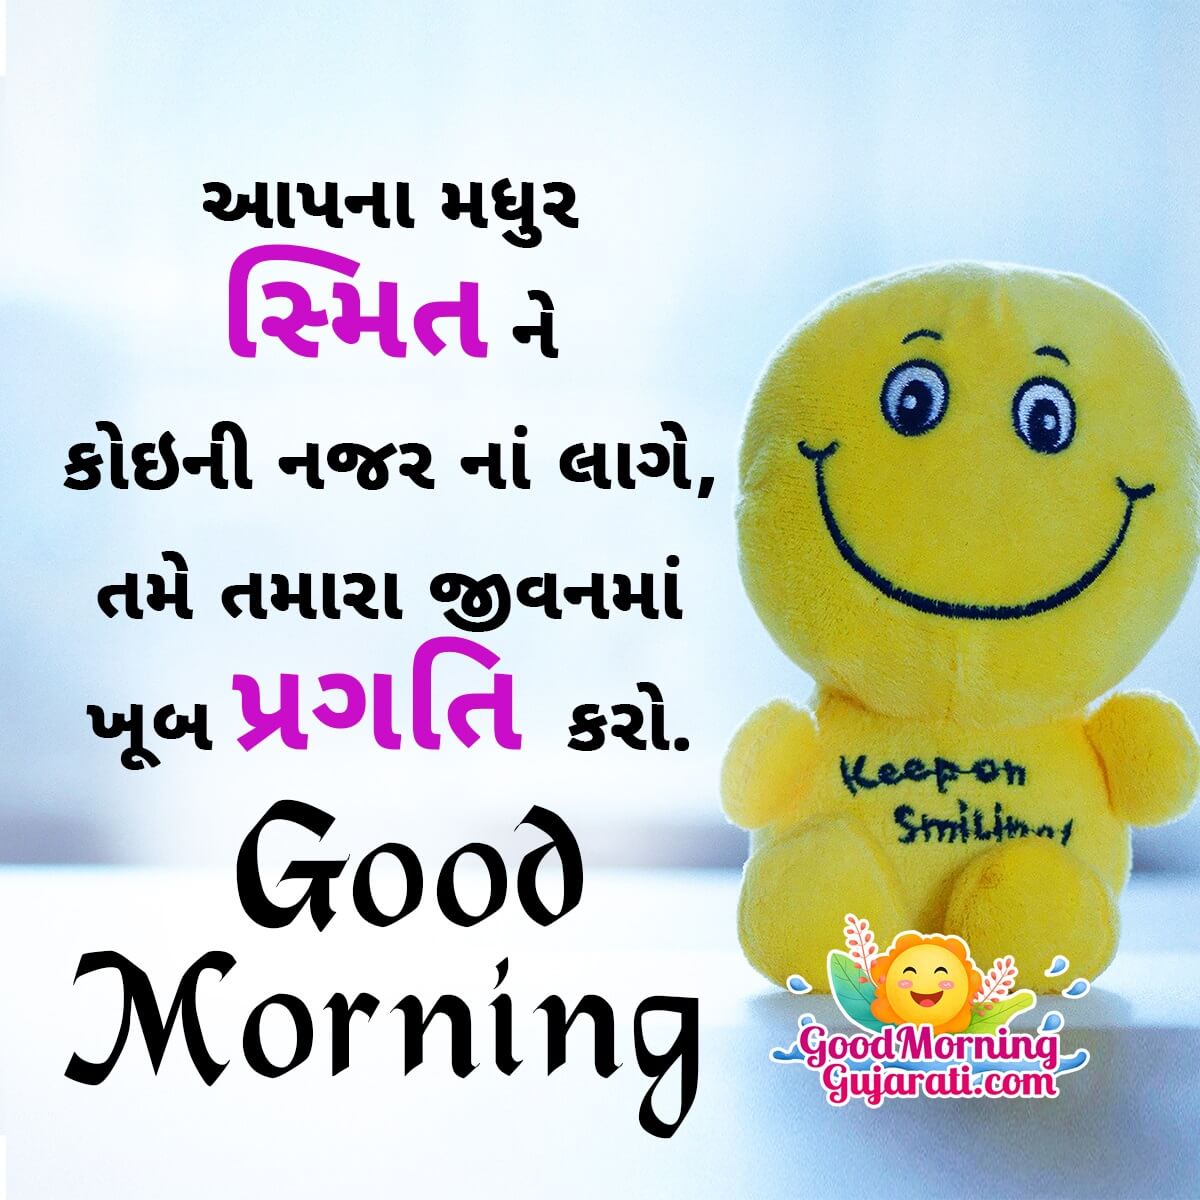 Good Morning Gujarati Wishes - Good Morning Wishes & Images in ...